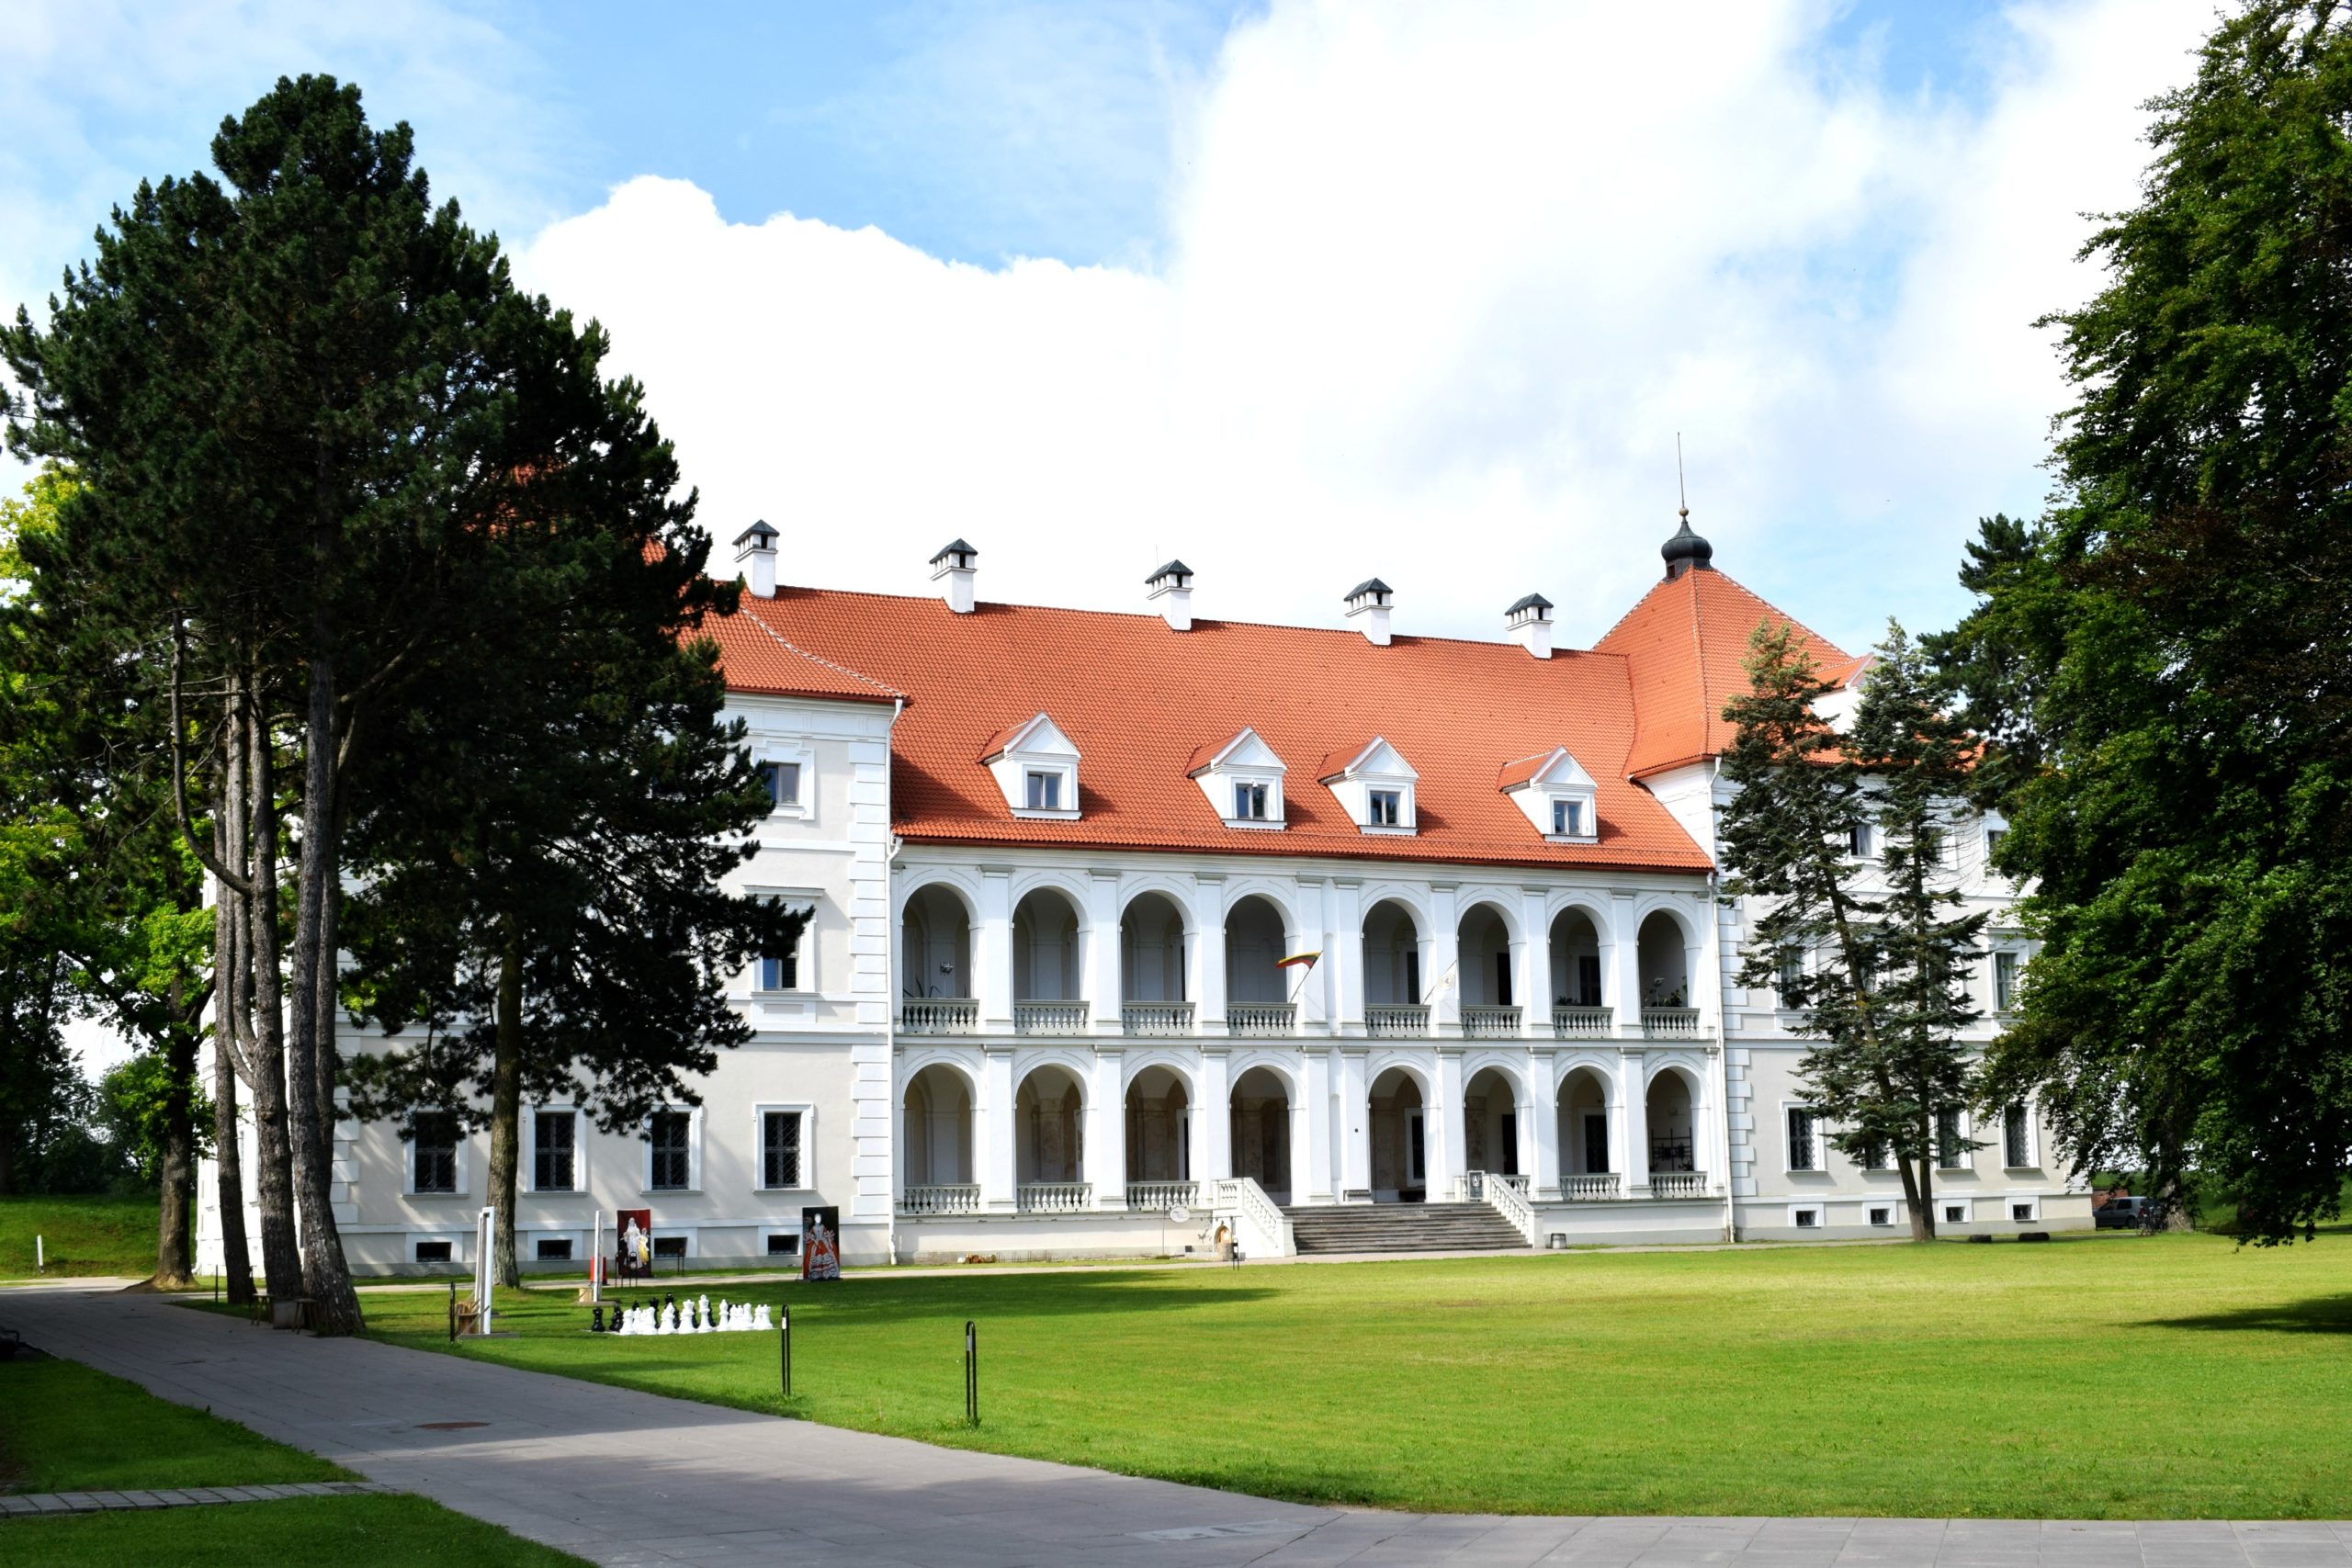 The castle of Birza, white classical building with arches.